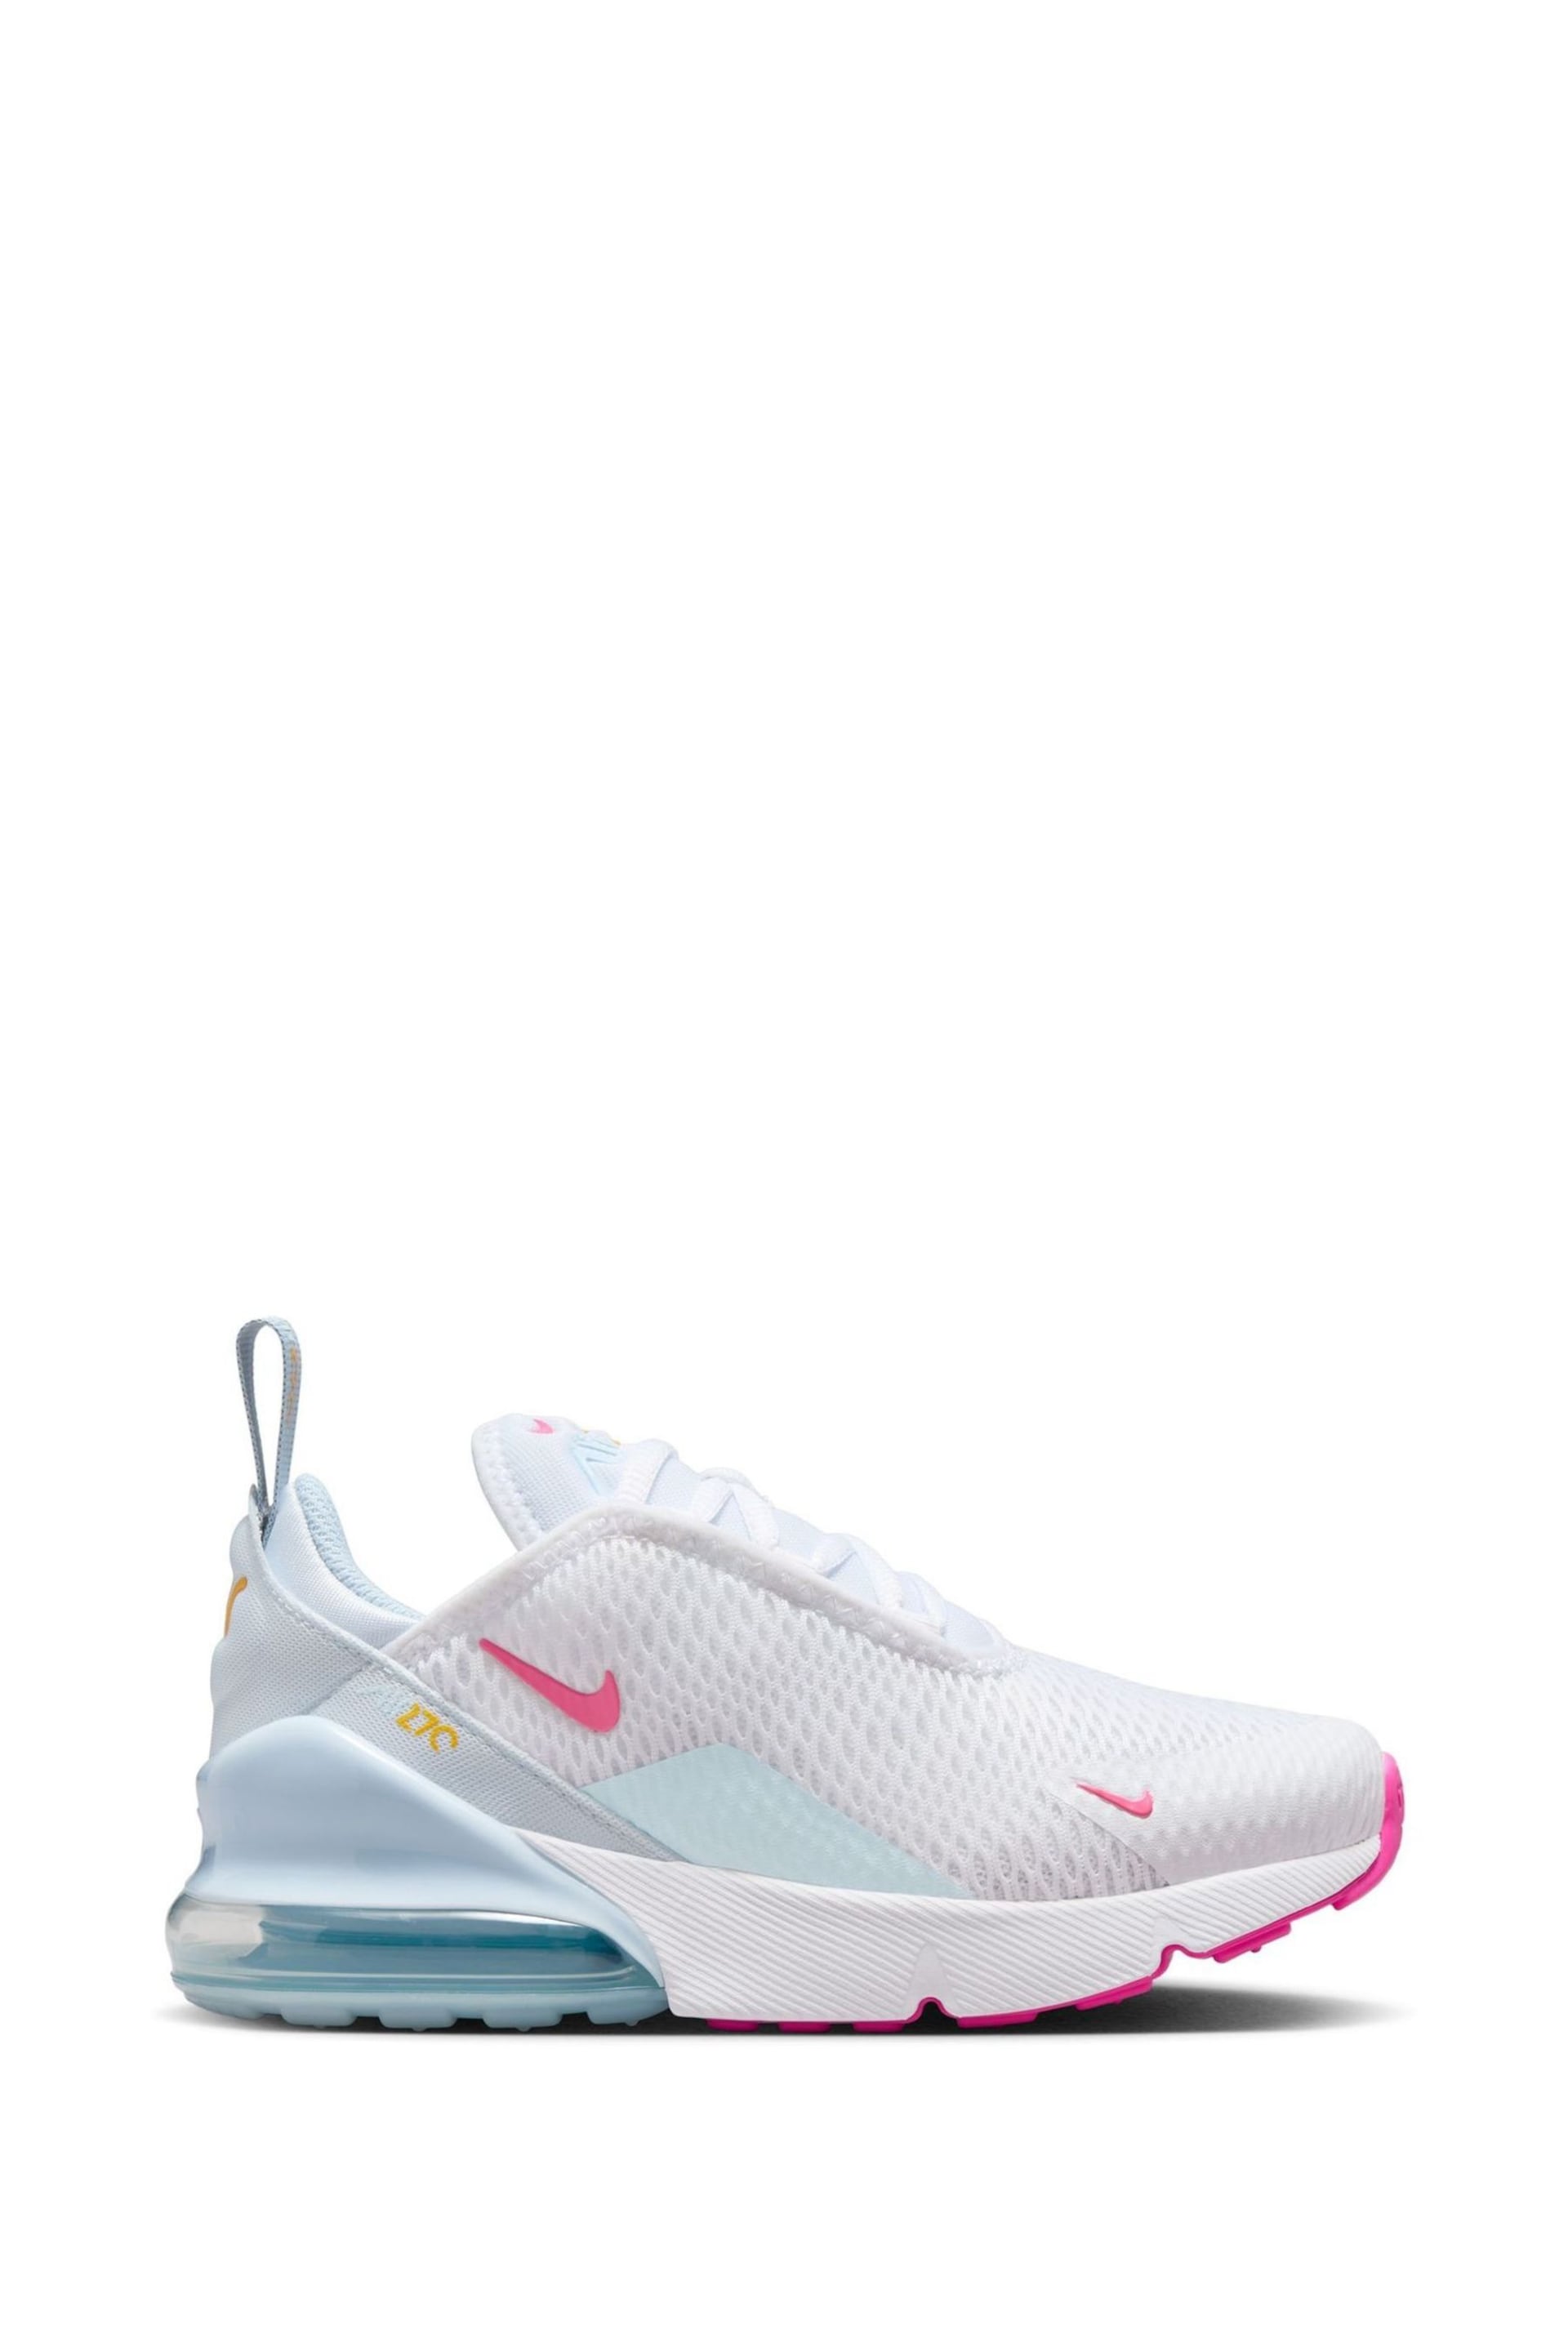 Nike White/Pink Air Max 270 Little Kids' Shoe - Image 1 of 8